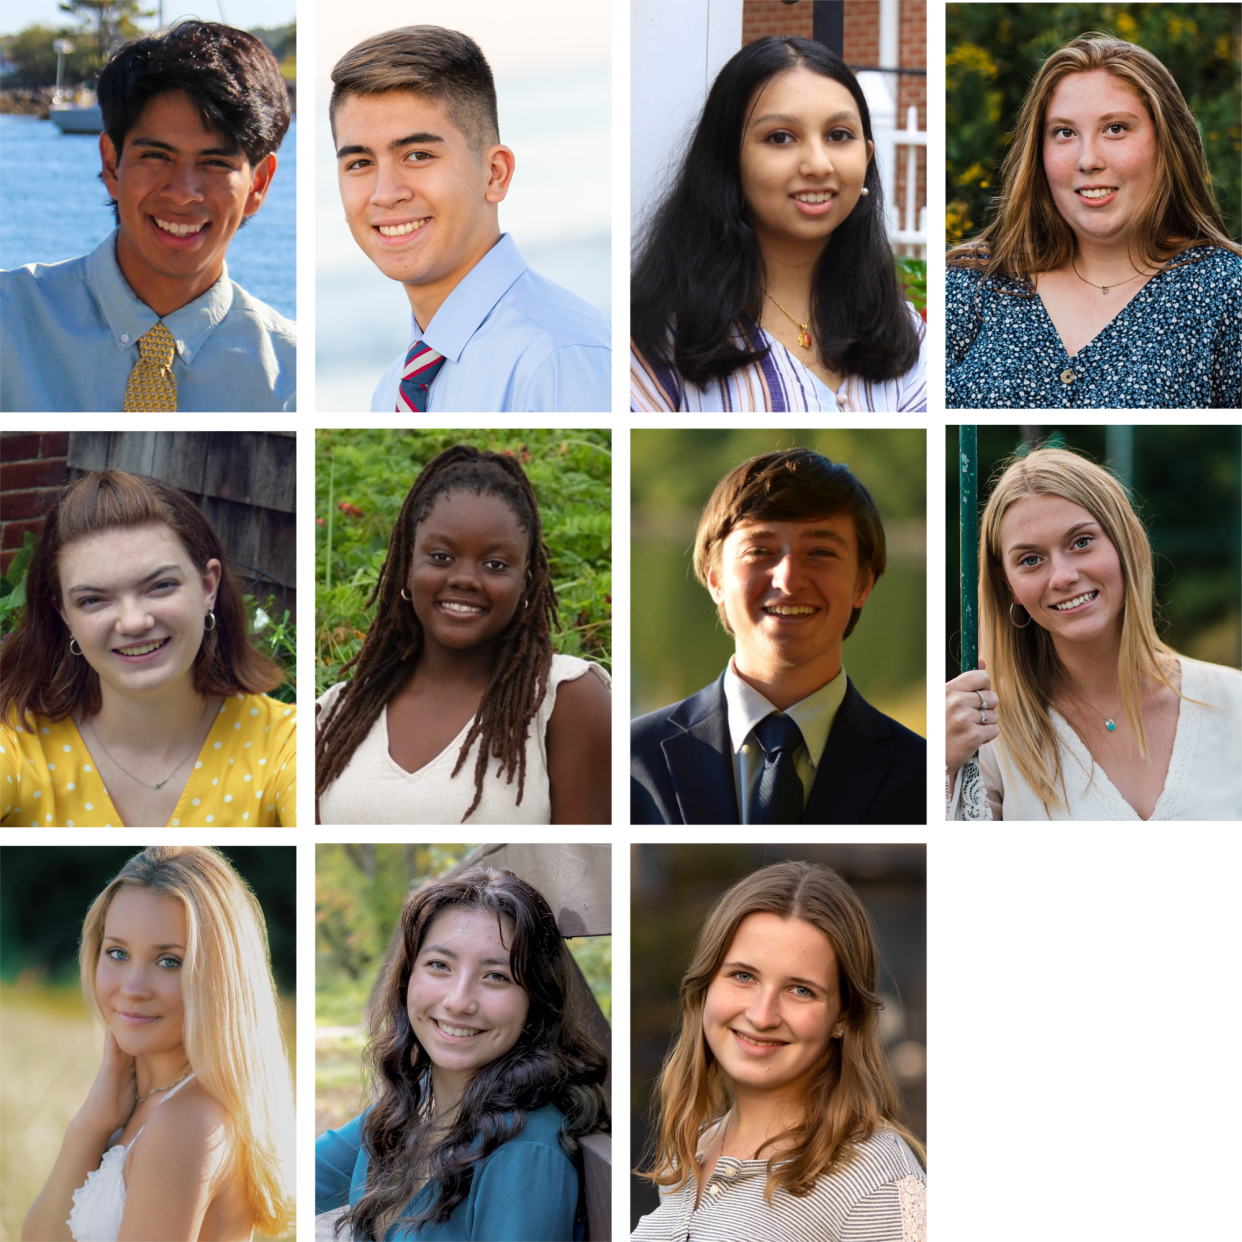 St. Thomas Aquinas High School in Dover has named the top 11 students in its Class of 2022.